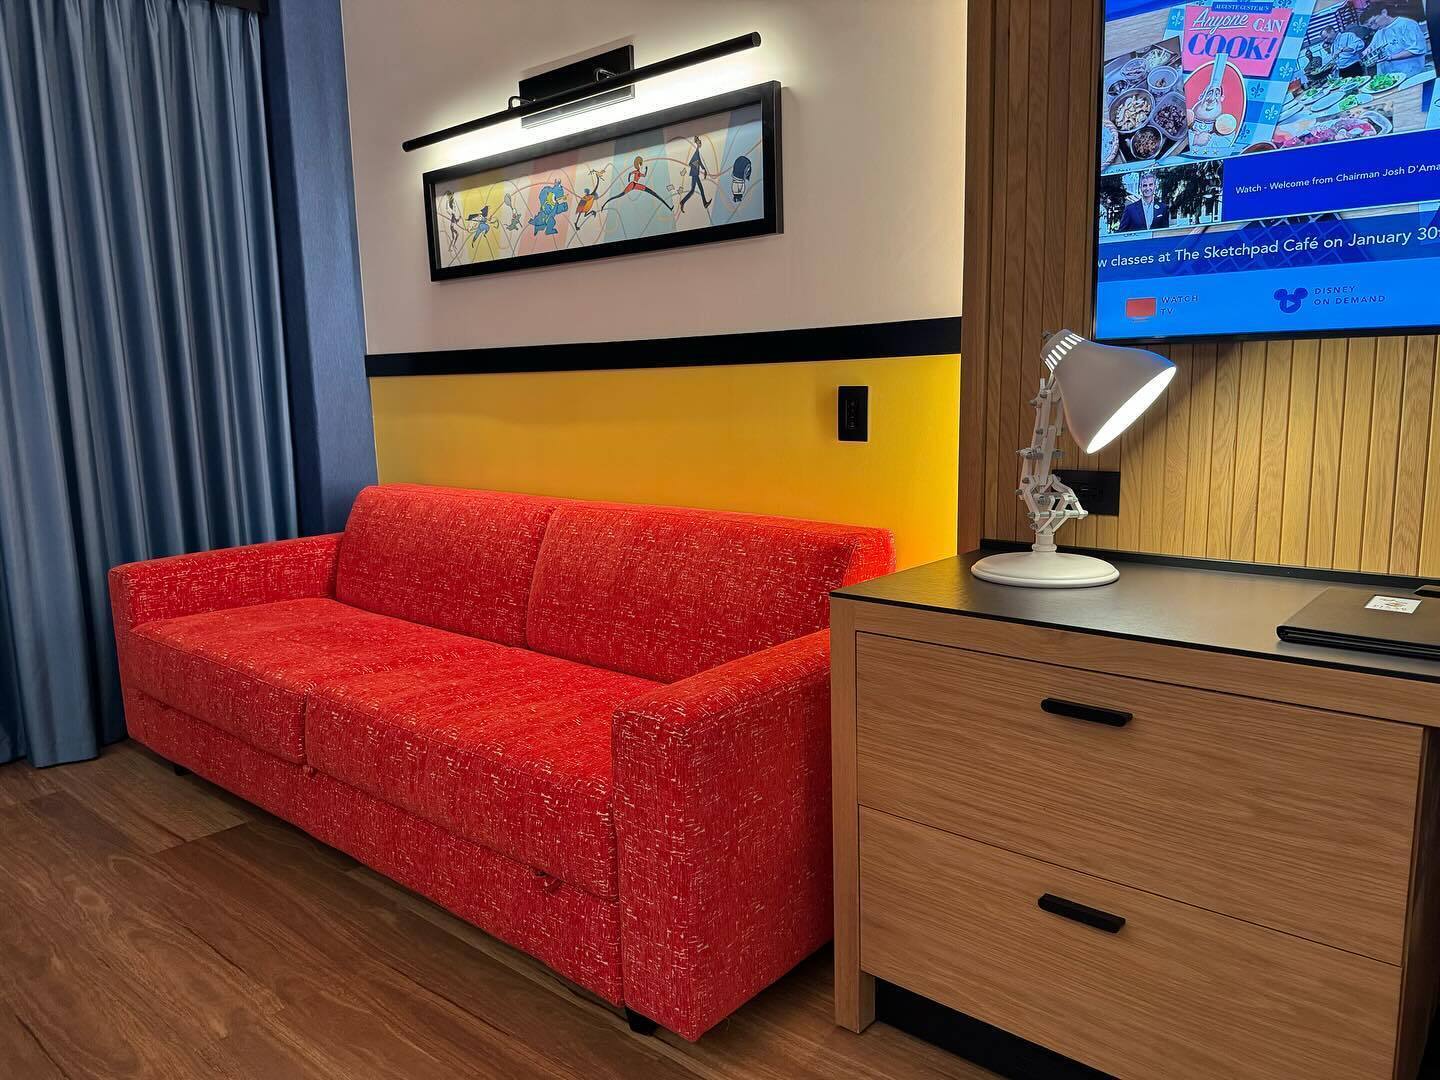 In the USA, a hotel themed around Pixar animation characters has been unveiled